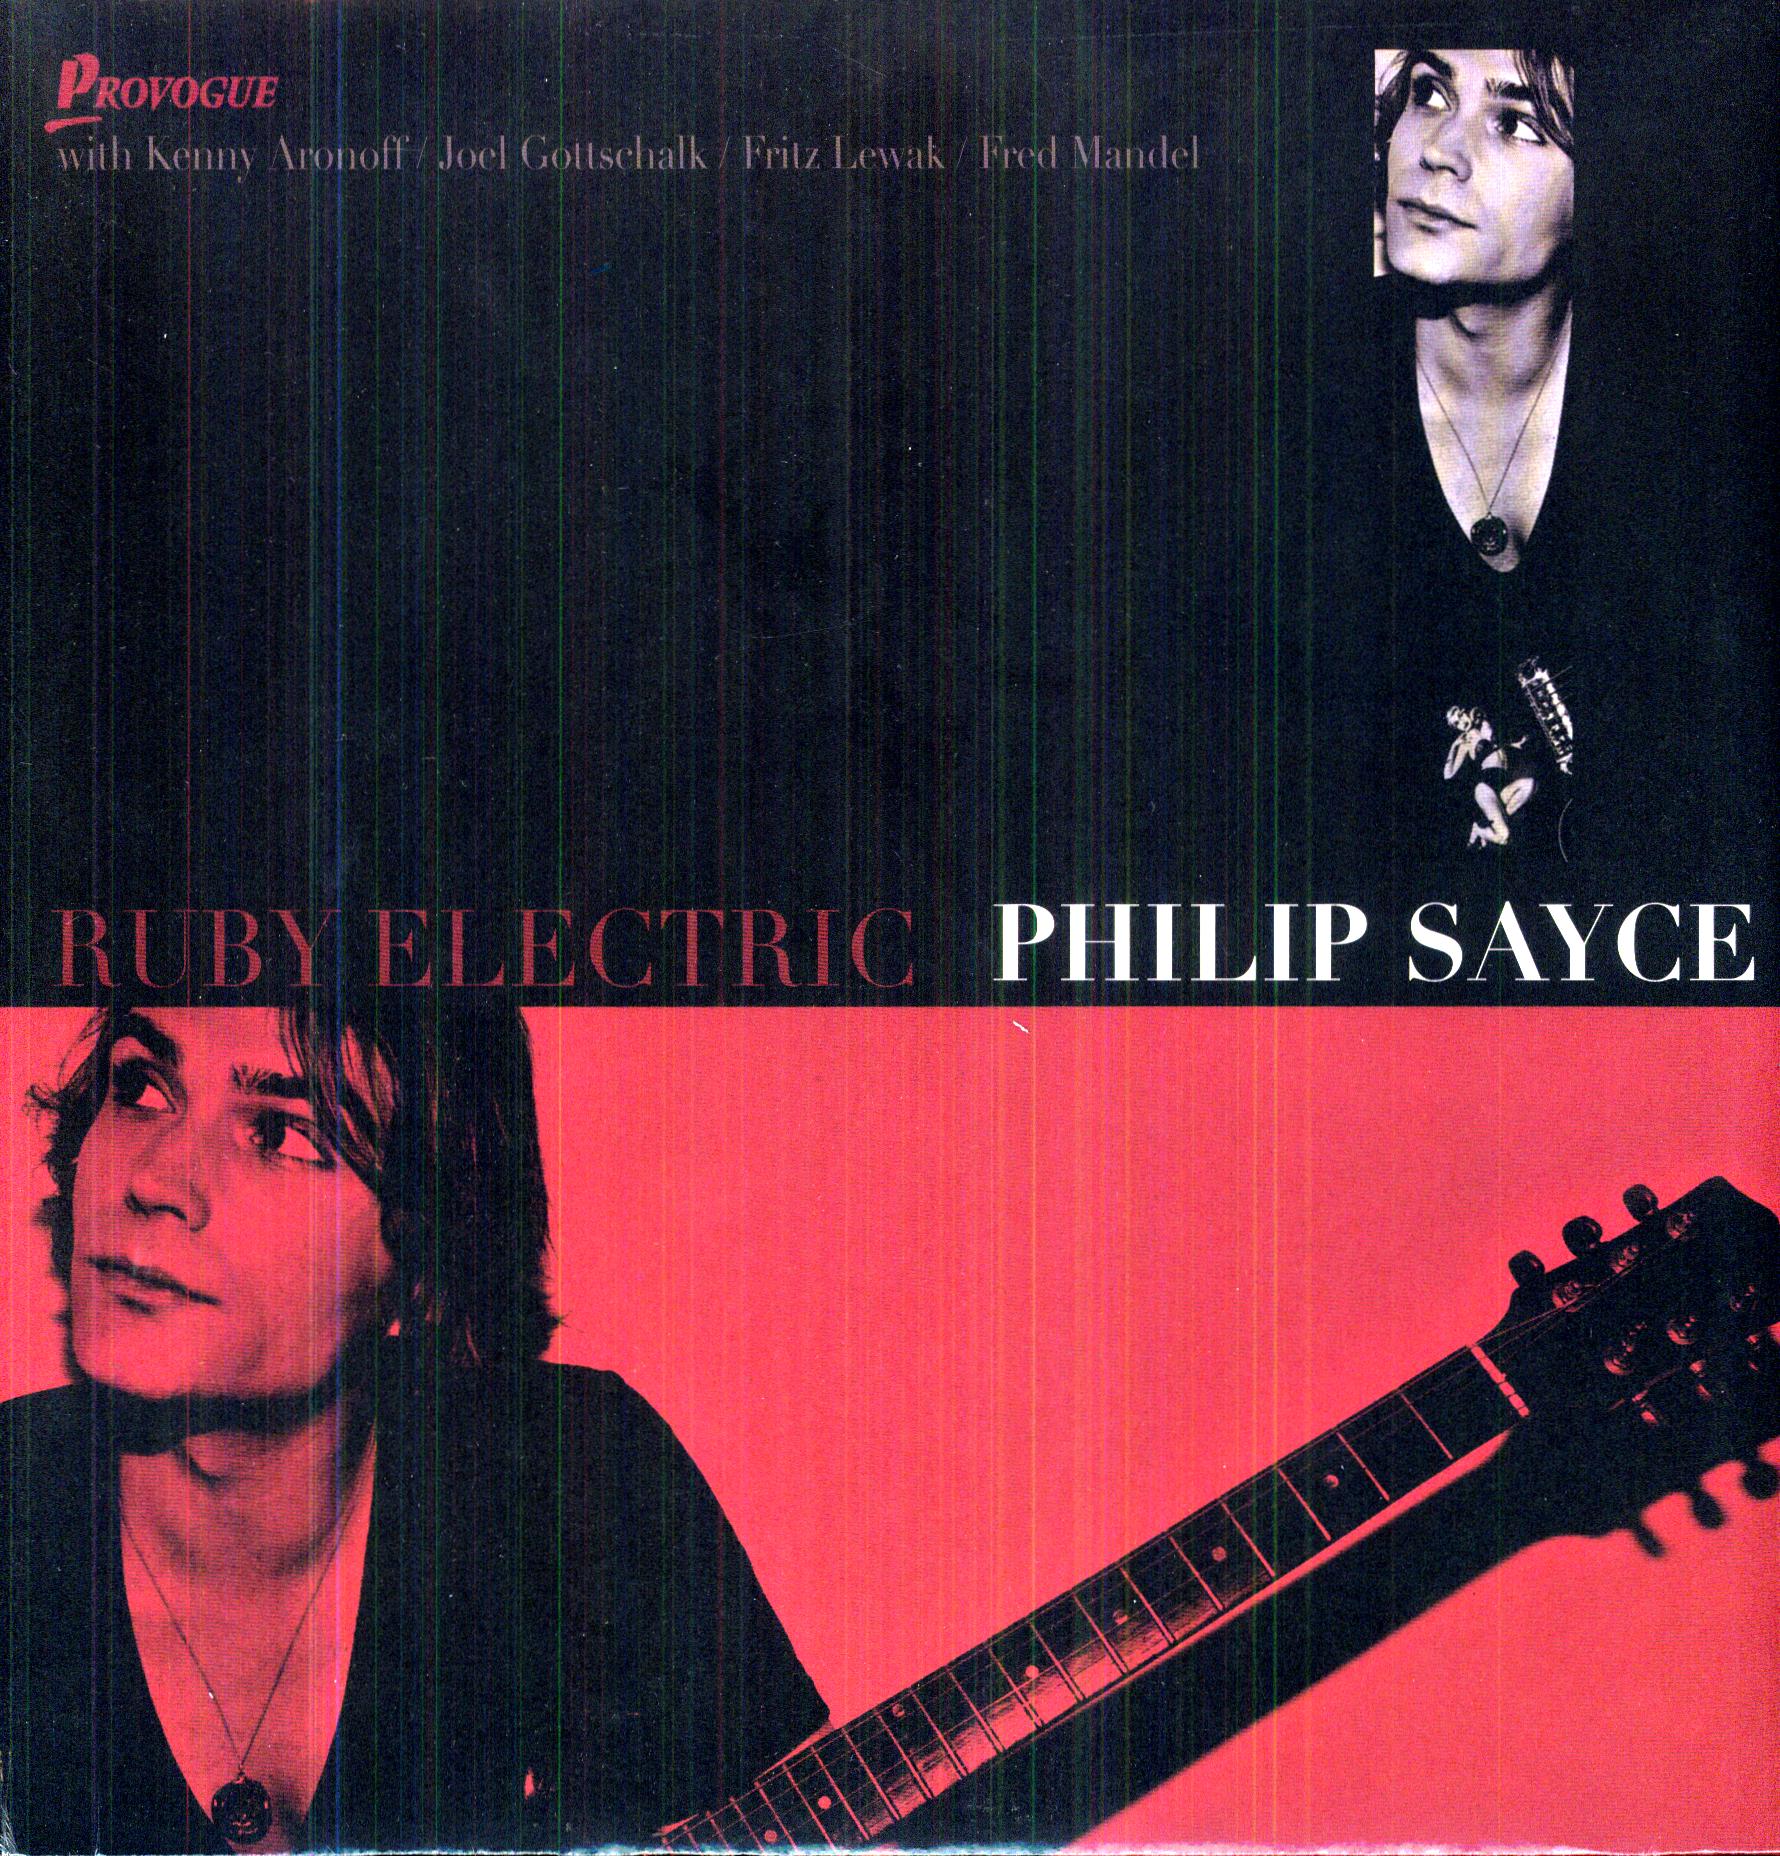 RUBY ELECTRIC